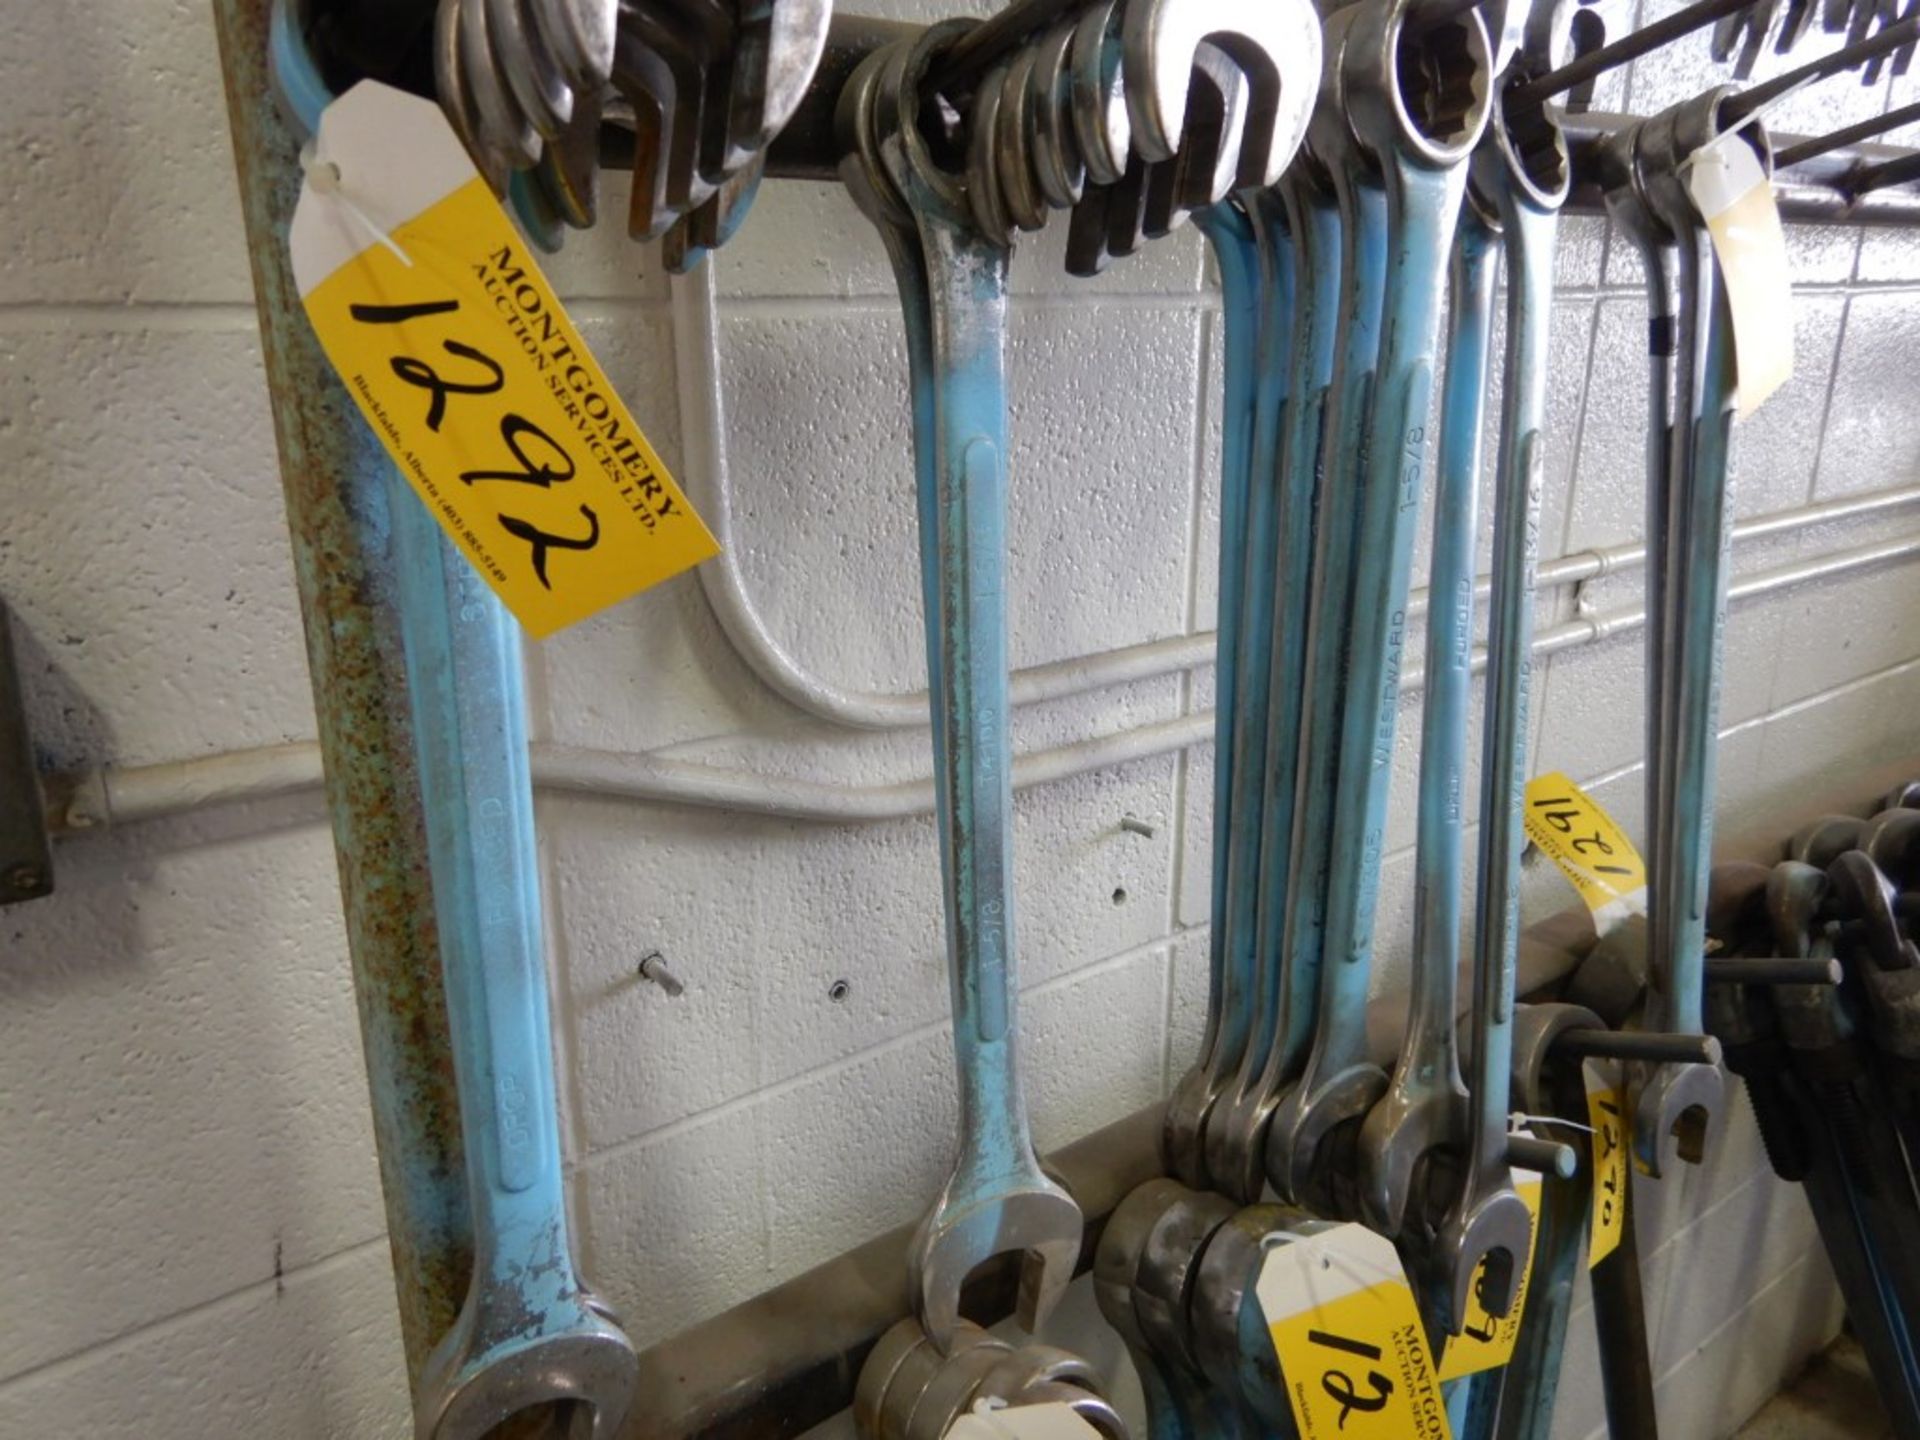 L/O WESTWARD COMBINATION WRENCHES 1 7/16", 1 5/8", 1 13/16" - Image 2 of 4